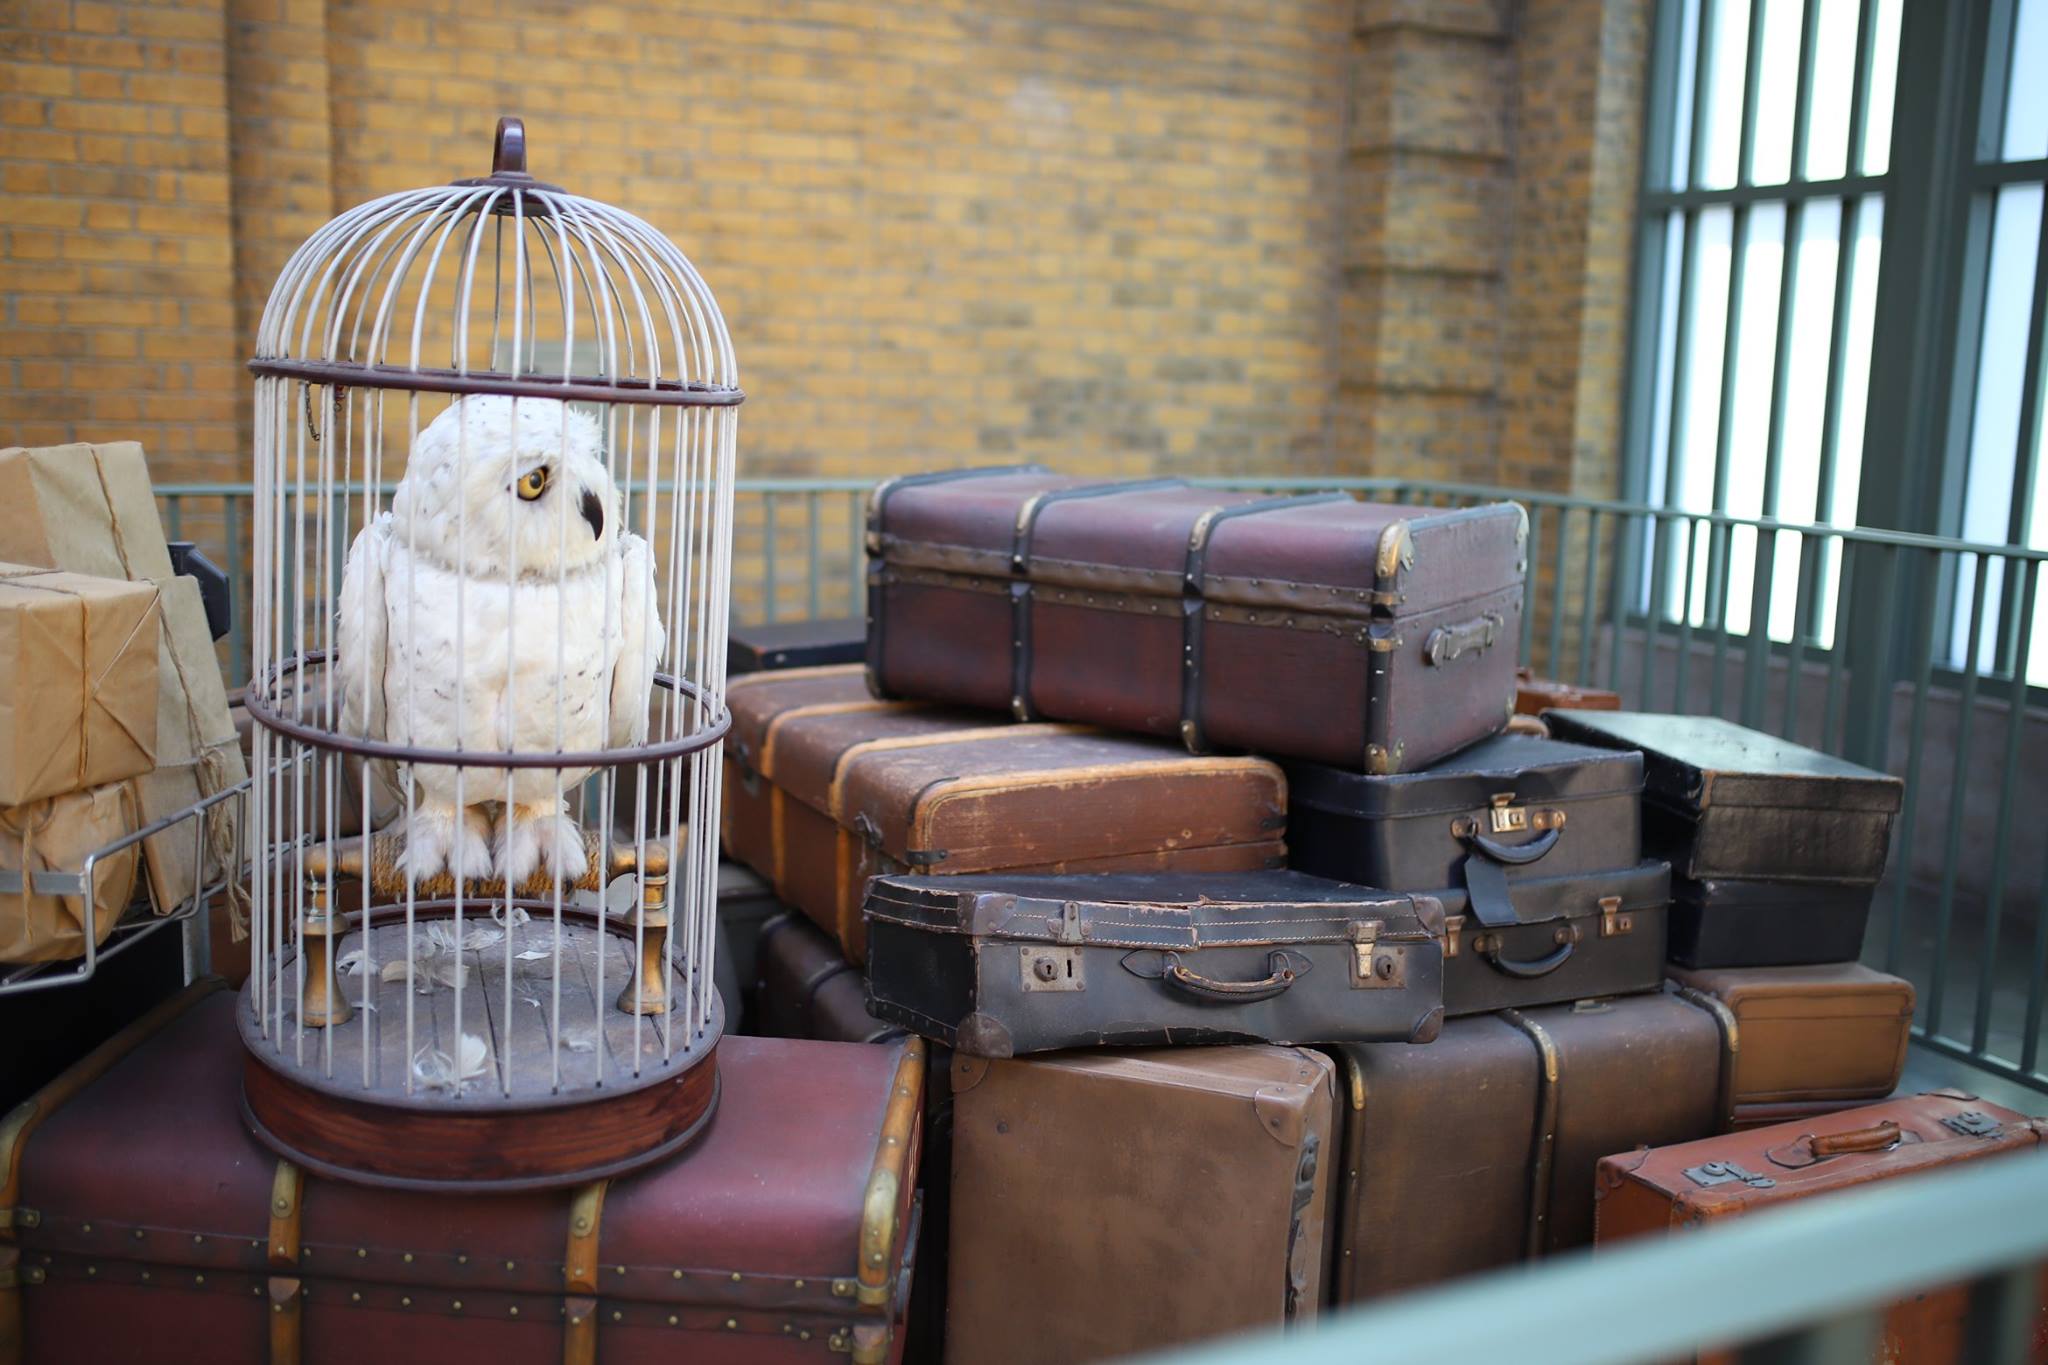 Contact us. Hedwig sits atop suitcases